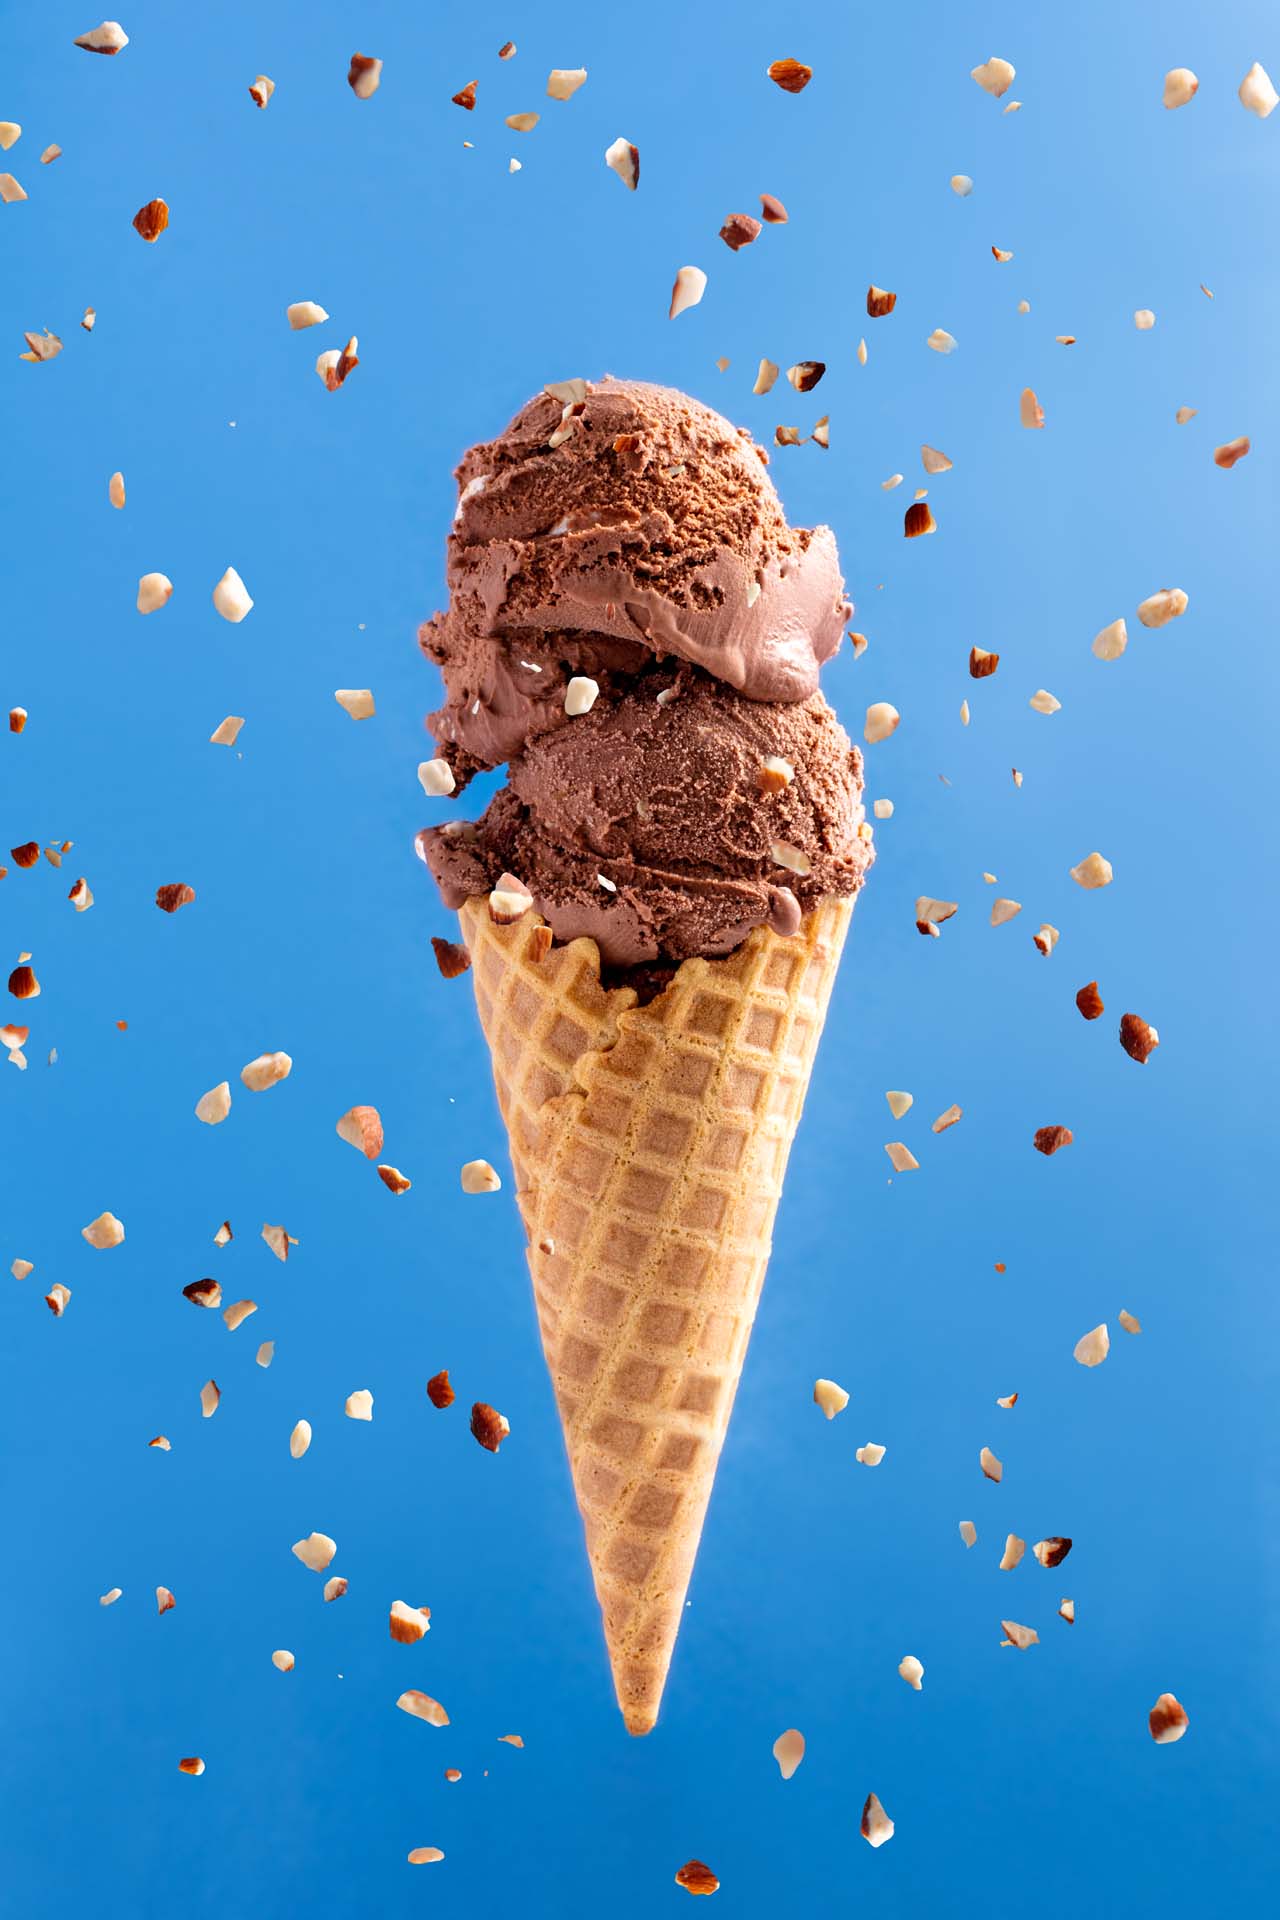 A Ice Cream Cone with Chocolate Ice Cream and Diced Almonds - Ice Cream Favorites